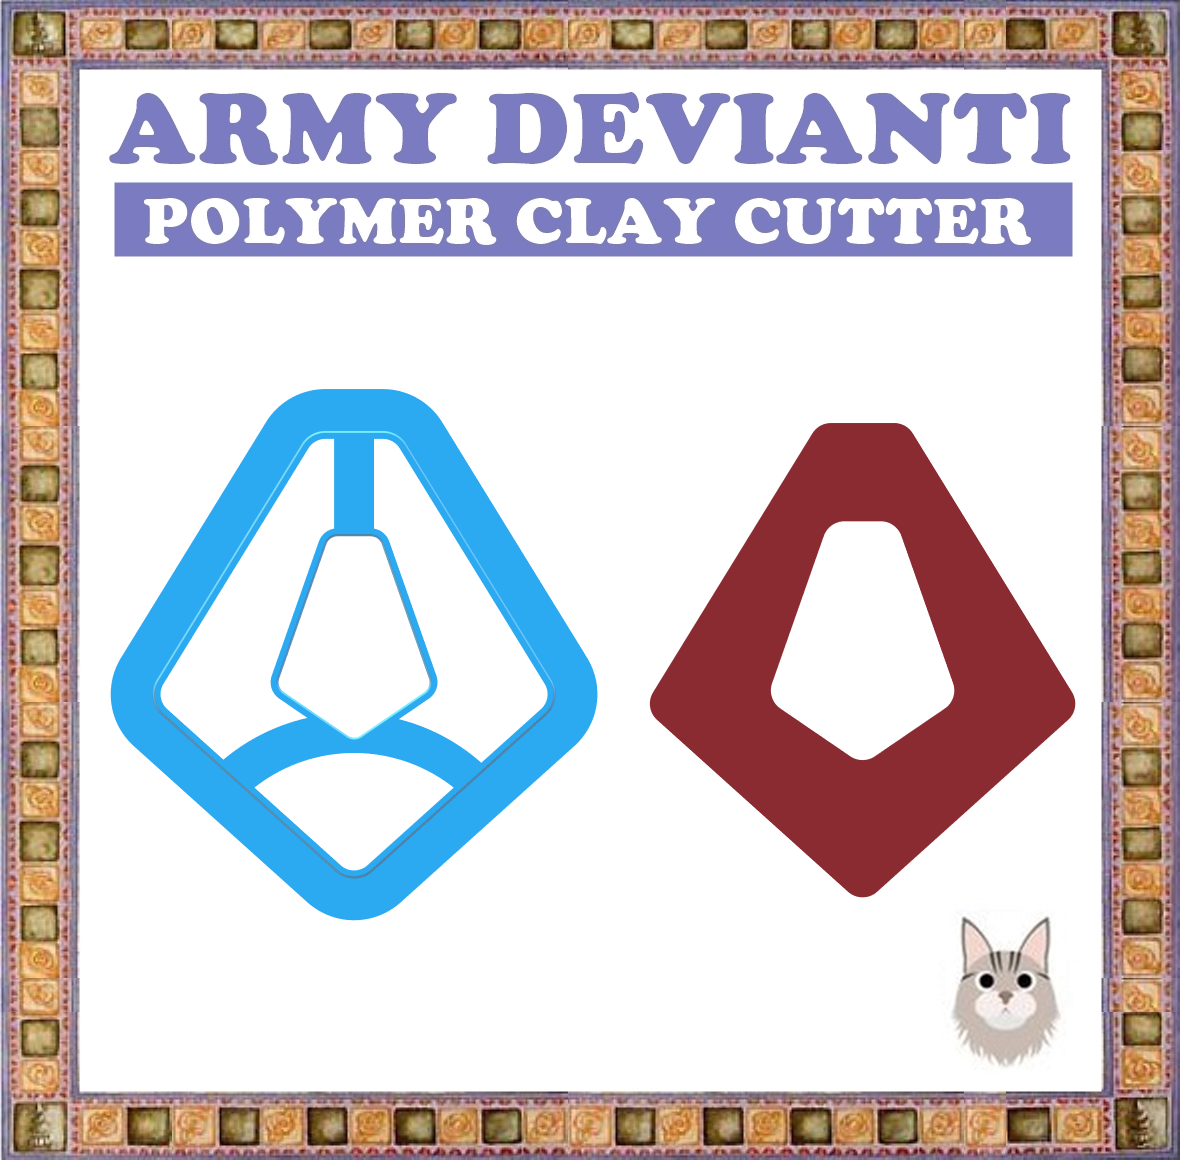 5 ARMY DEVIANTI POLYMER CLAY CUTTER STL file POLYMER CLAY CUTTER 6 SIZE.CC.ARMY DEVIANTI・3D printing template to download, armydevianti